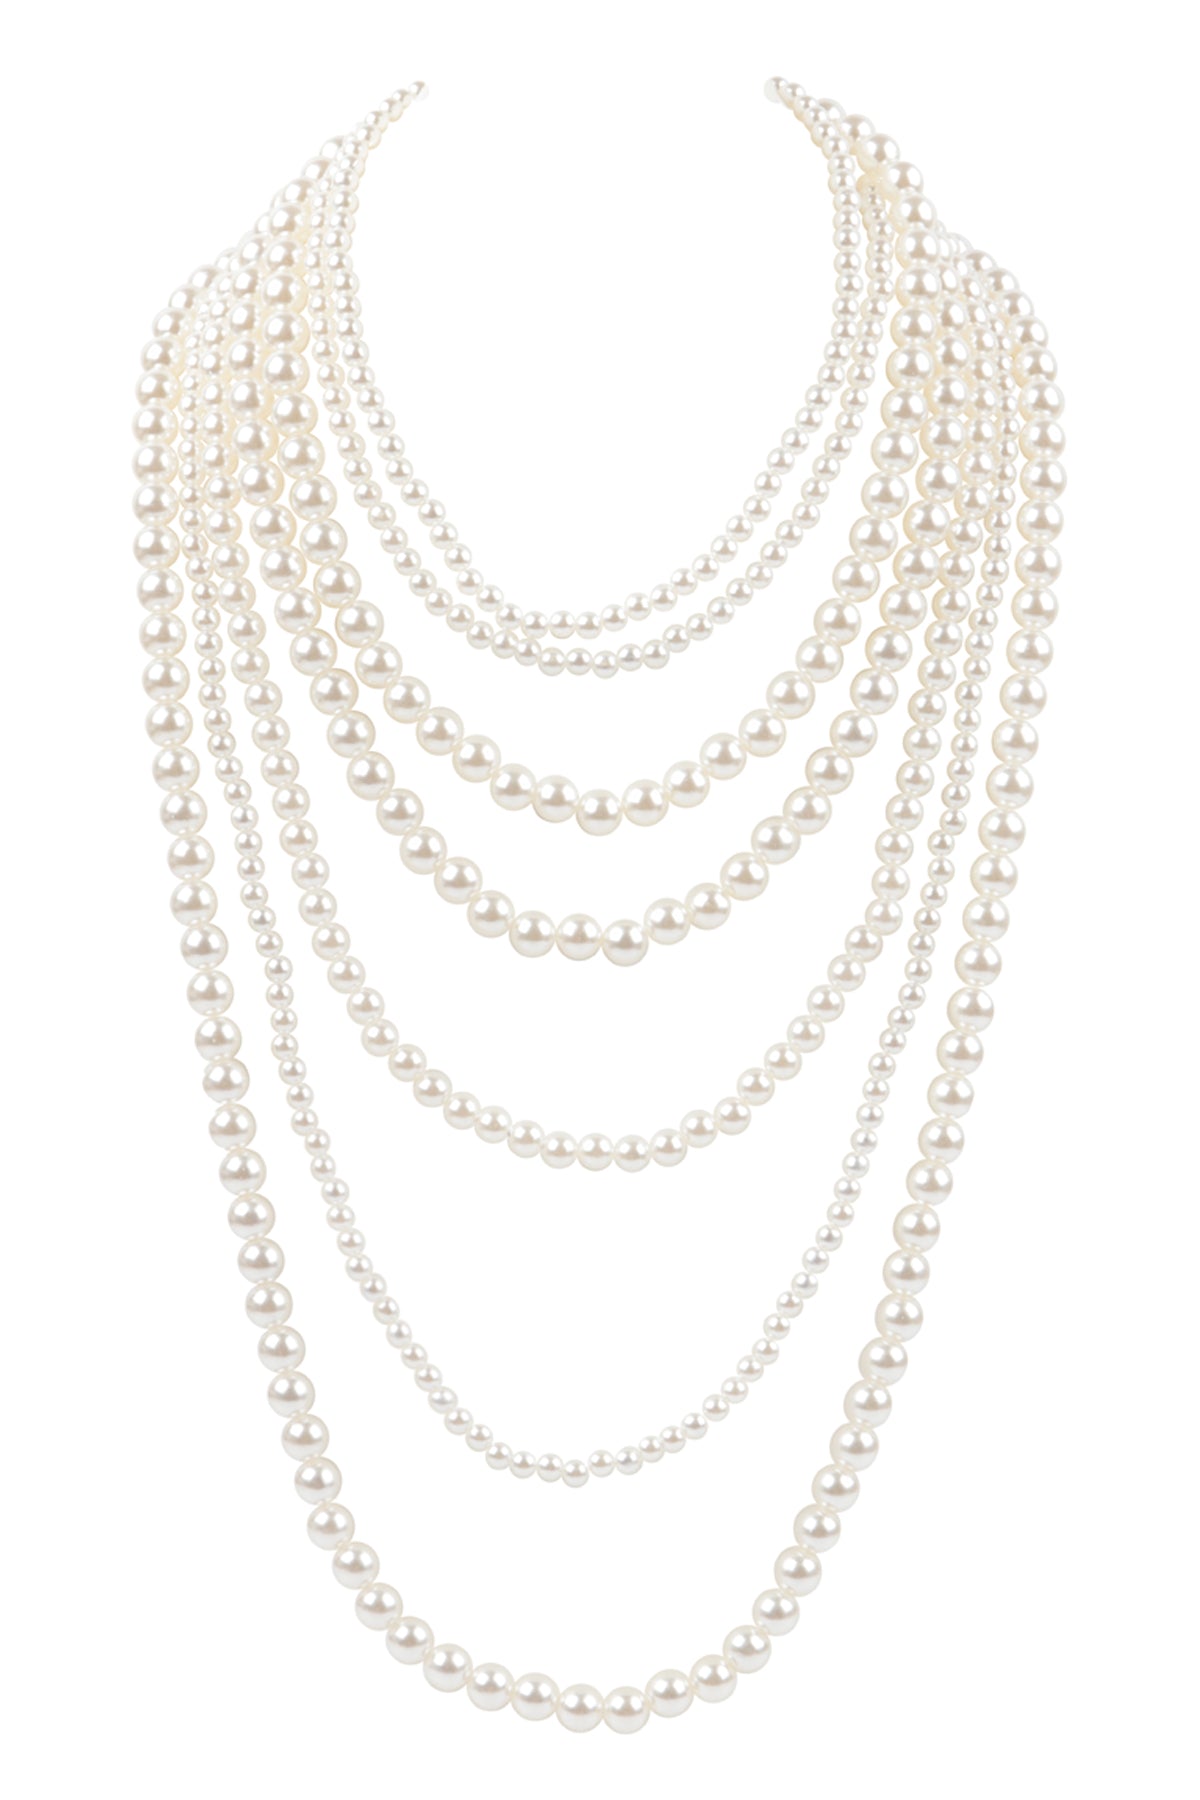 LAYERED PEARL BEADS NECKLACE-CREAM